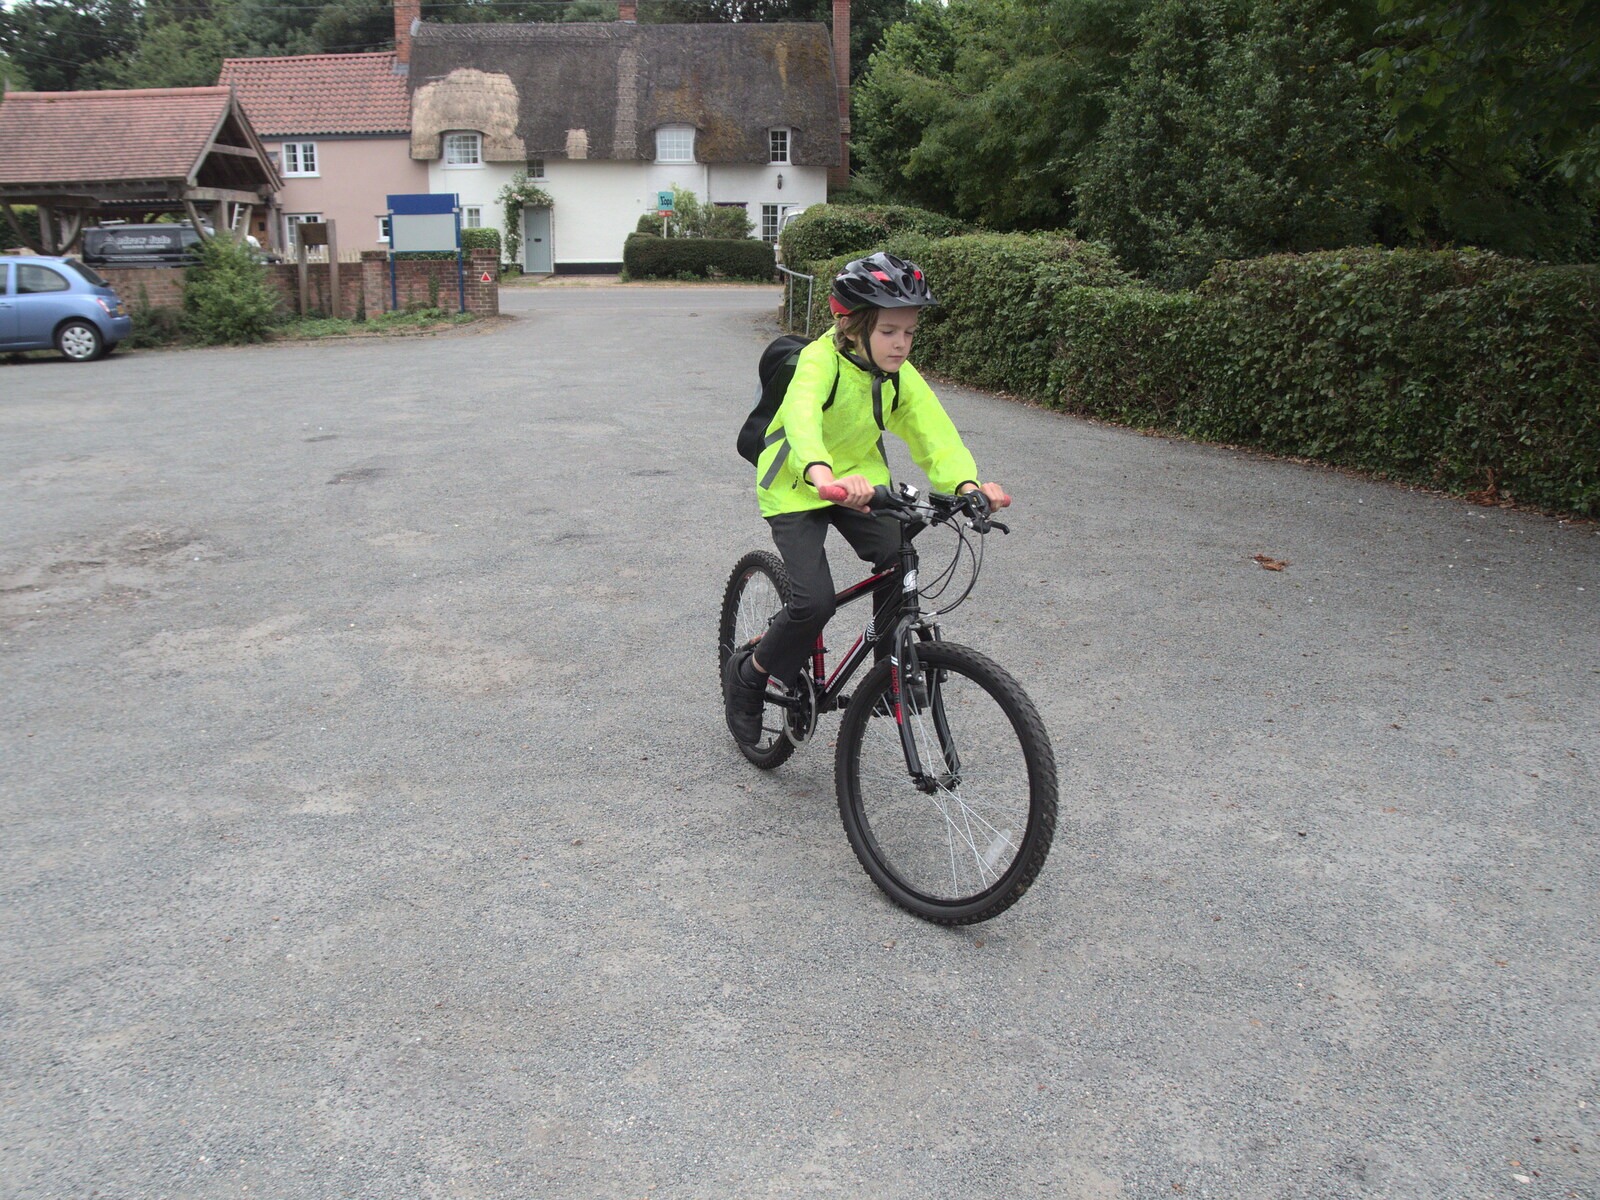 Harry cycles to the village hall with his eyes closed from Pizza at the Village Hall, Brome, Suffolk - 24th June 2022